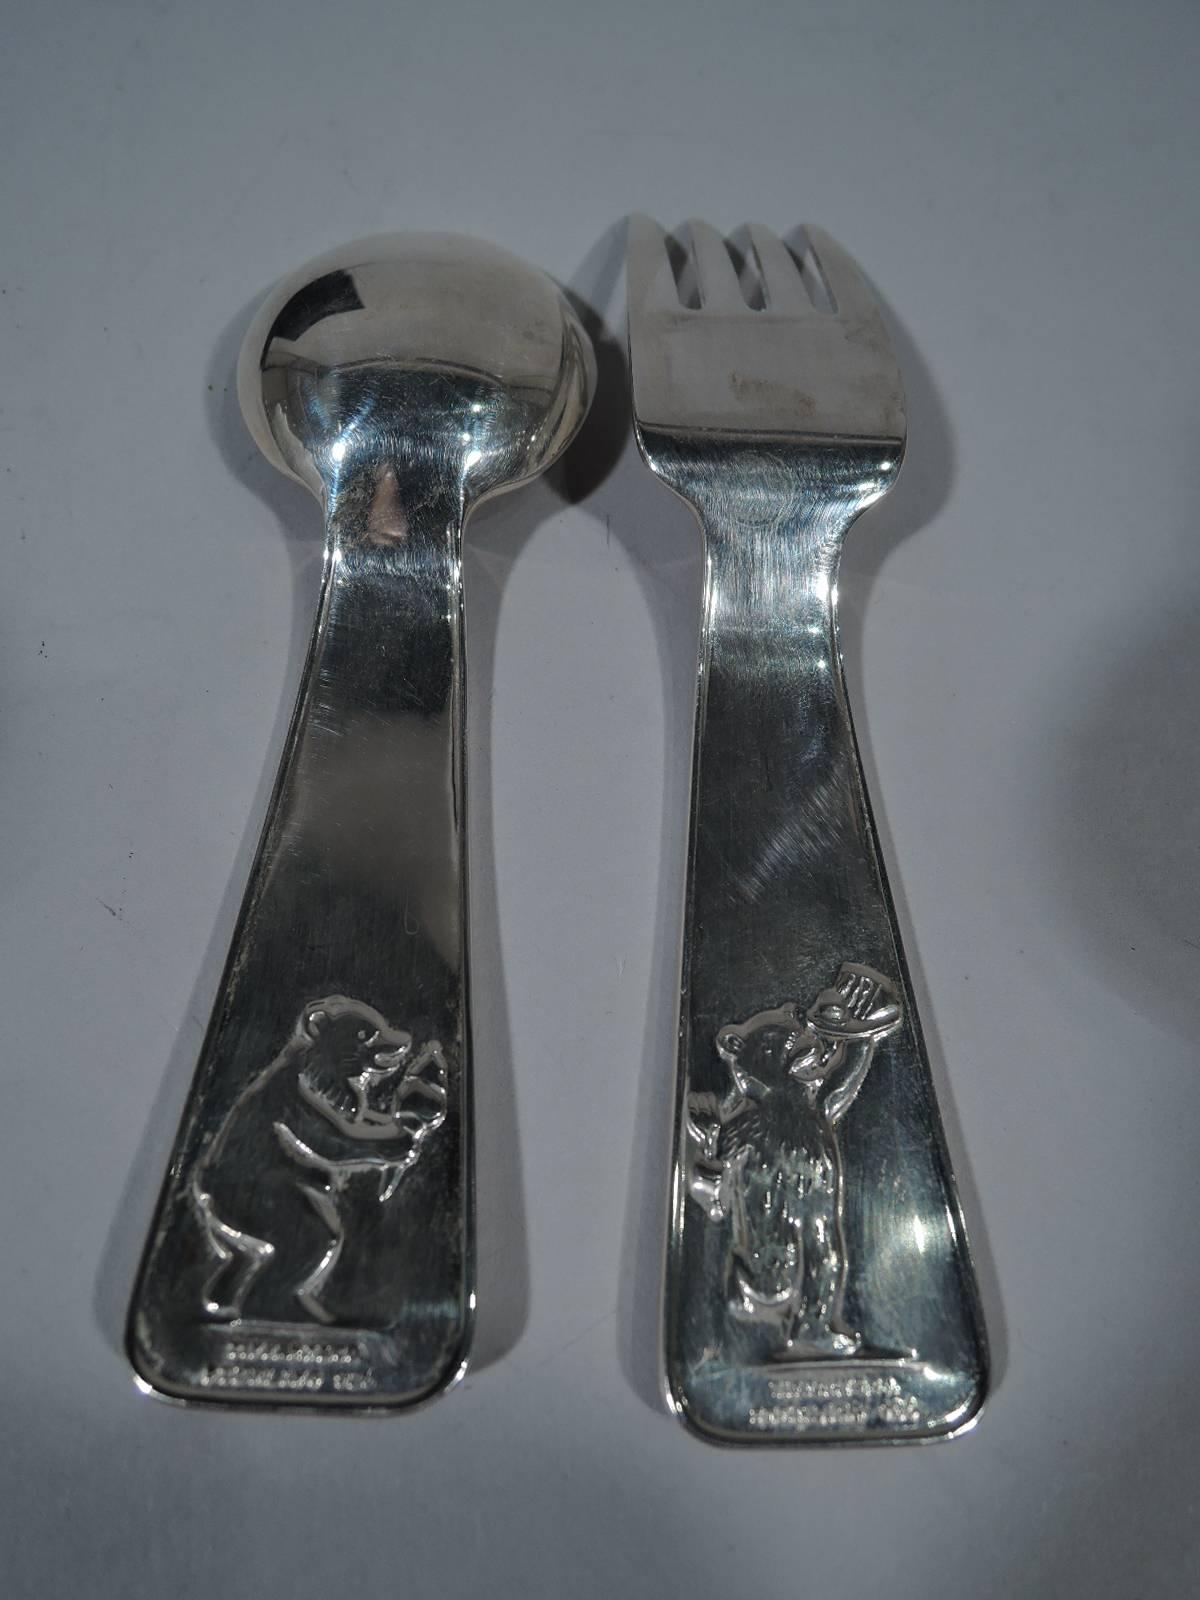 ABC sterling silver baby spoon and fork. Made by Tiffany & Co. in New York. Wide and tapering terminals with acid-etched bears climbing and carrying letters. On terminal back, a bear licks an ice cream cone (spoon) and holds aloft a plate with cake